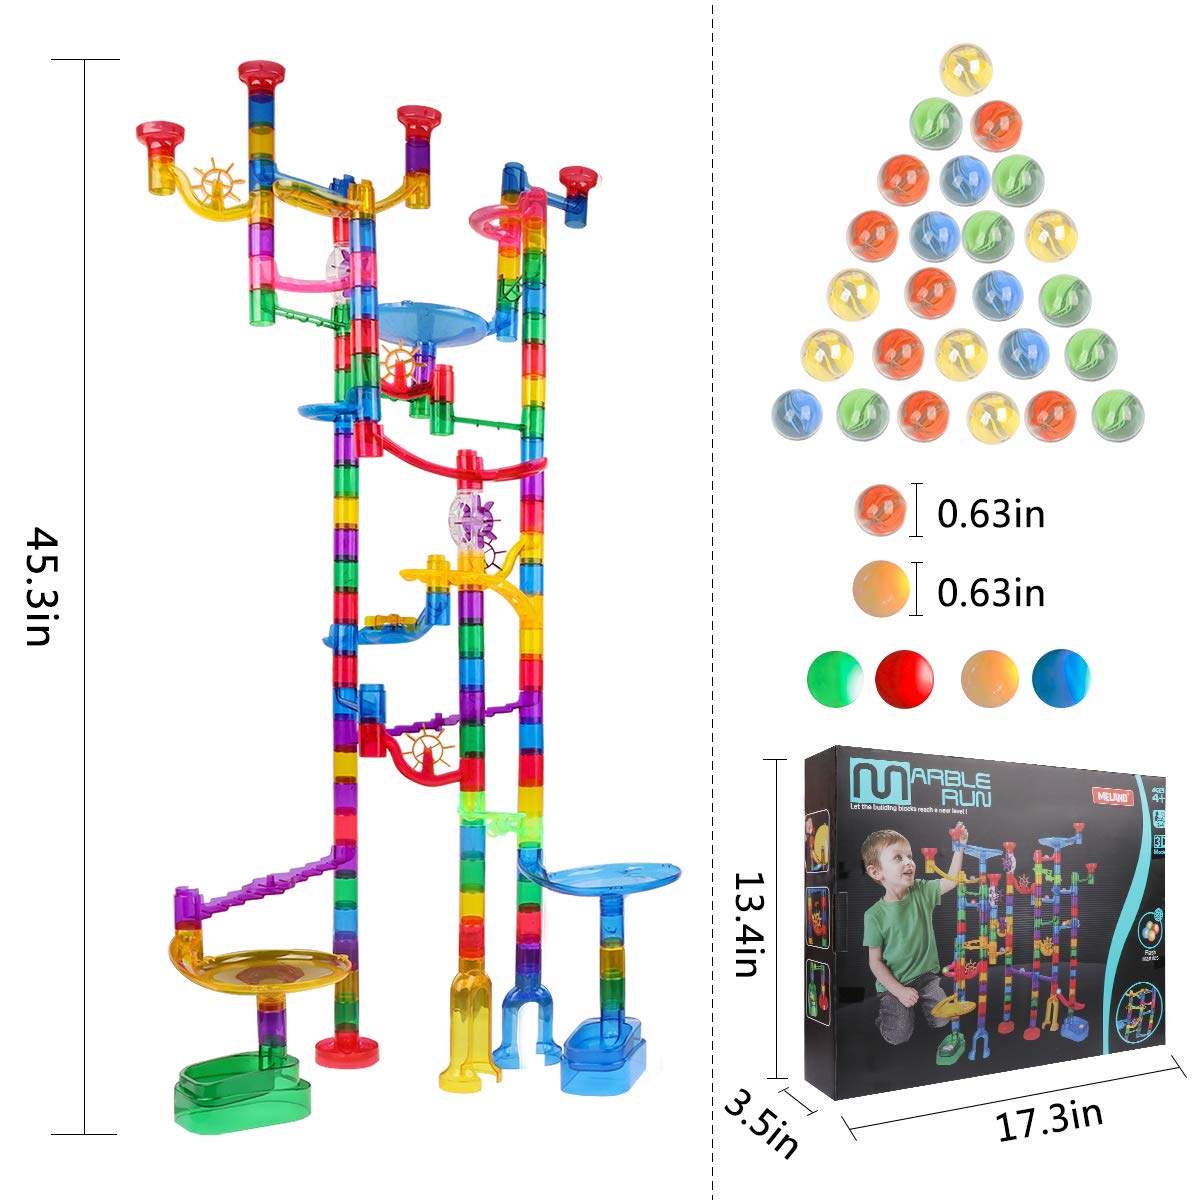 Meland Marble Run Sets for Kids - 153Pcs Marble Race Track Marble Maze Madness Game STEM Building Tower Toy for 4 5 6 + Year Old Boys Girls(113 Pcs + 30 Glass + 10 Led Lighted Marbles)